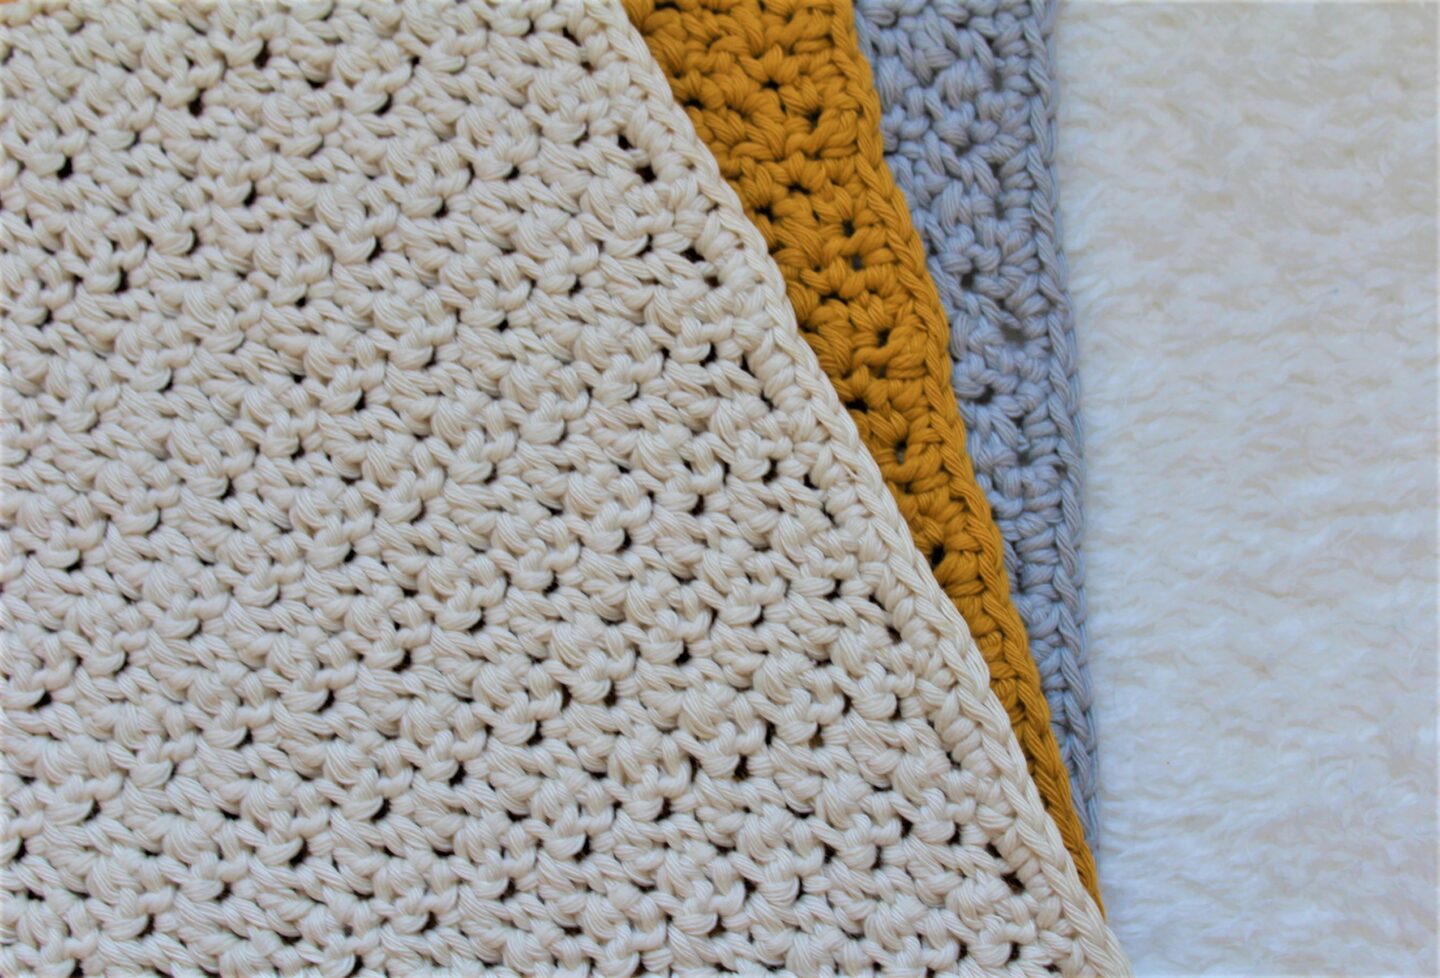 Close up of the whispering pines dishcloth pattern